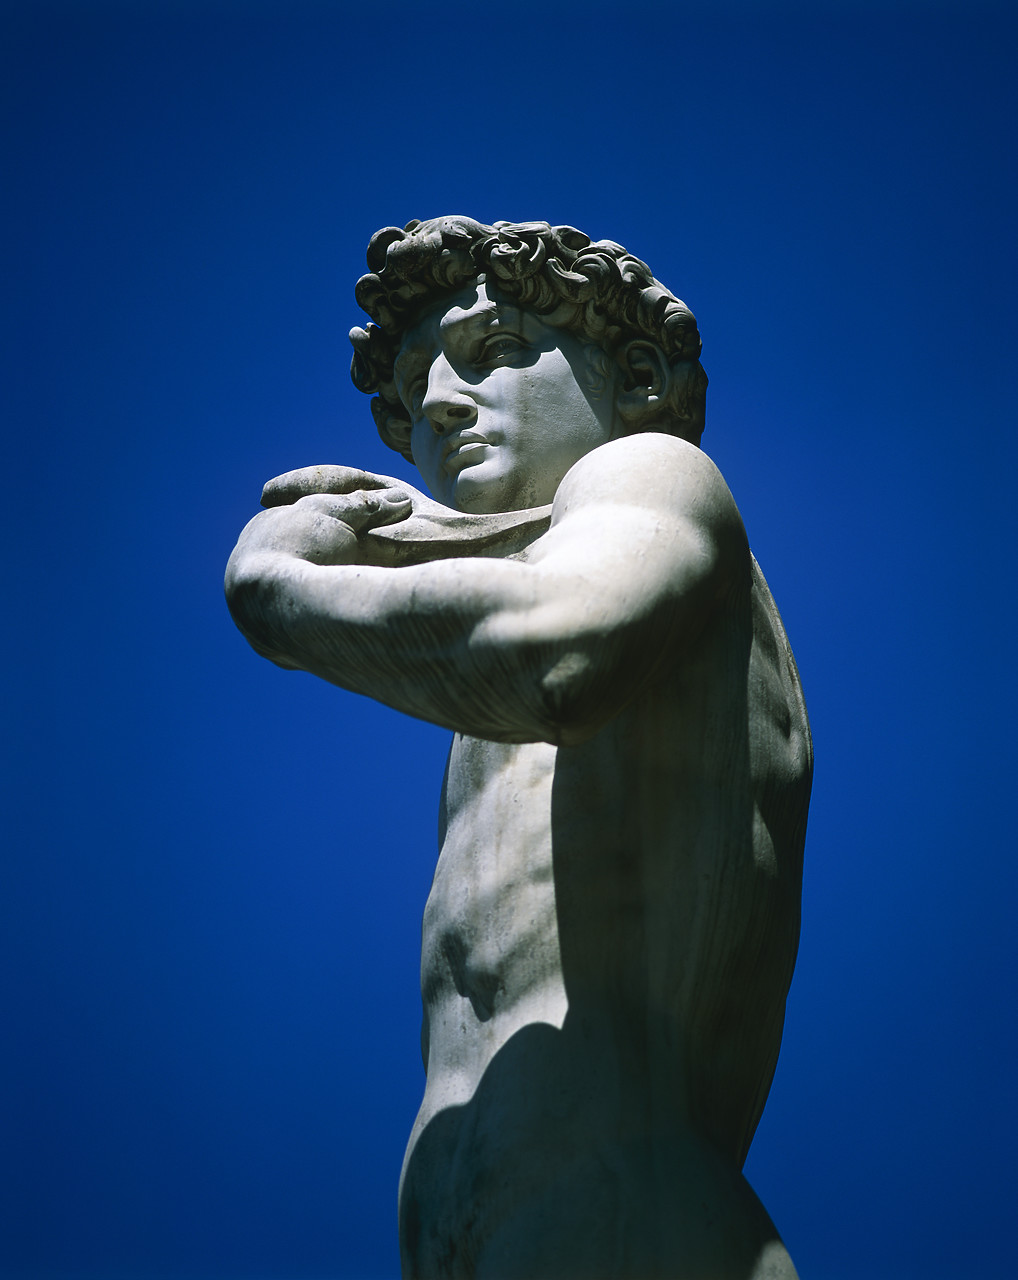 #020087-1 - Michael Angelo's Statue of David, Florence, Italy